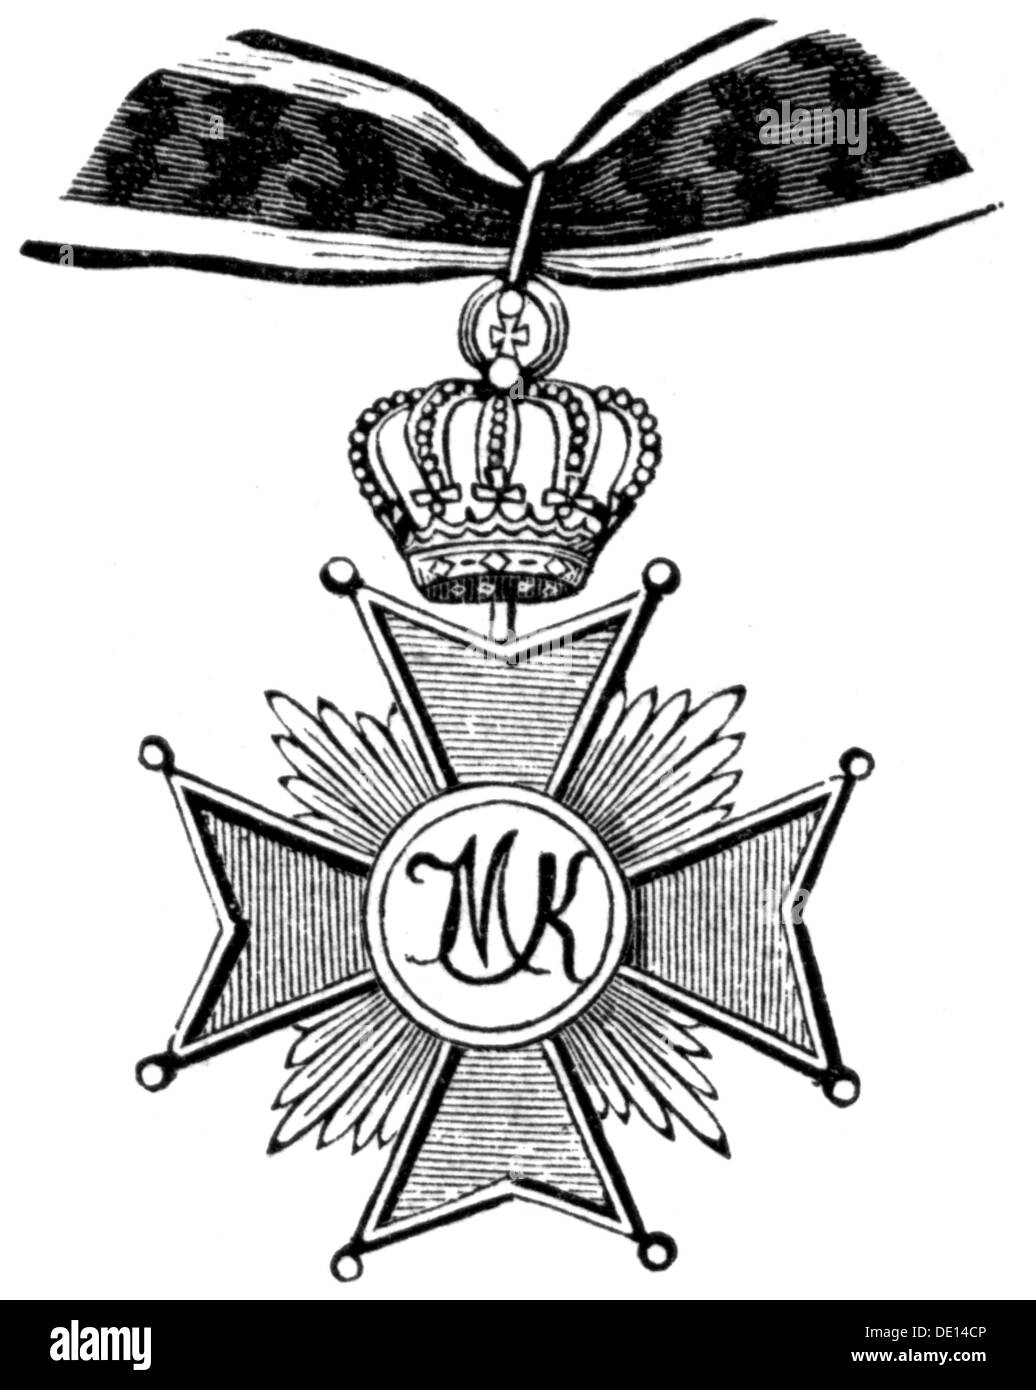 medals and decorations, Germany, Bavaria, Military Order of Max Joseph, founded 1.1.1806 by King Maximilian I of Bavaria, badge, wood engraving, 2nd half 19th century, Maltese cross, crosses, ribbon, ribbons, military order, orders of merit, Order of Merit, military, armed forces, Kingdom of Bavaria, historic, historical, Additional-Rights-Clearences-Not Available Stock Photo